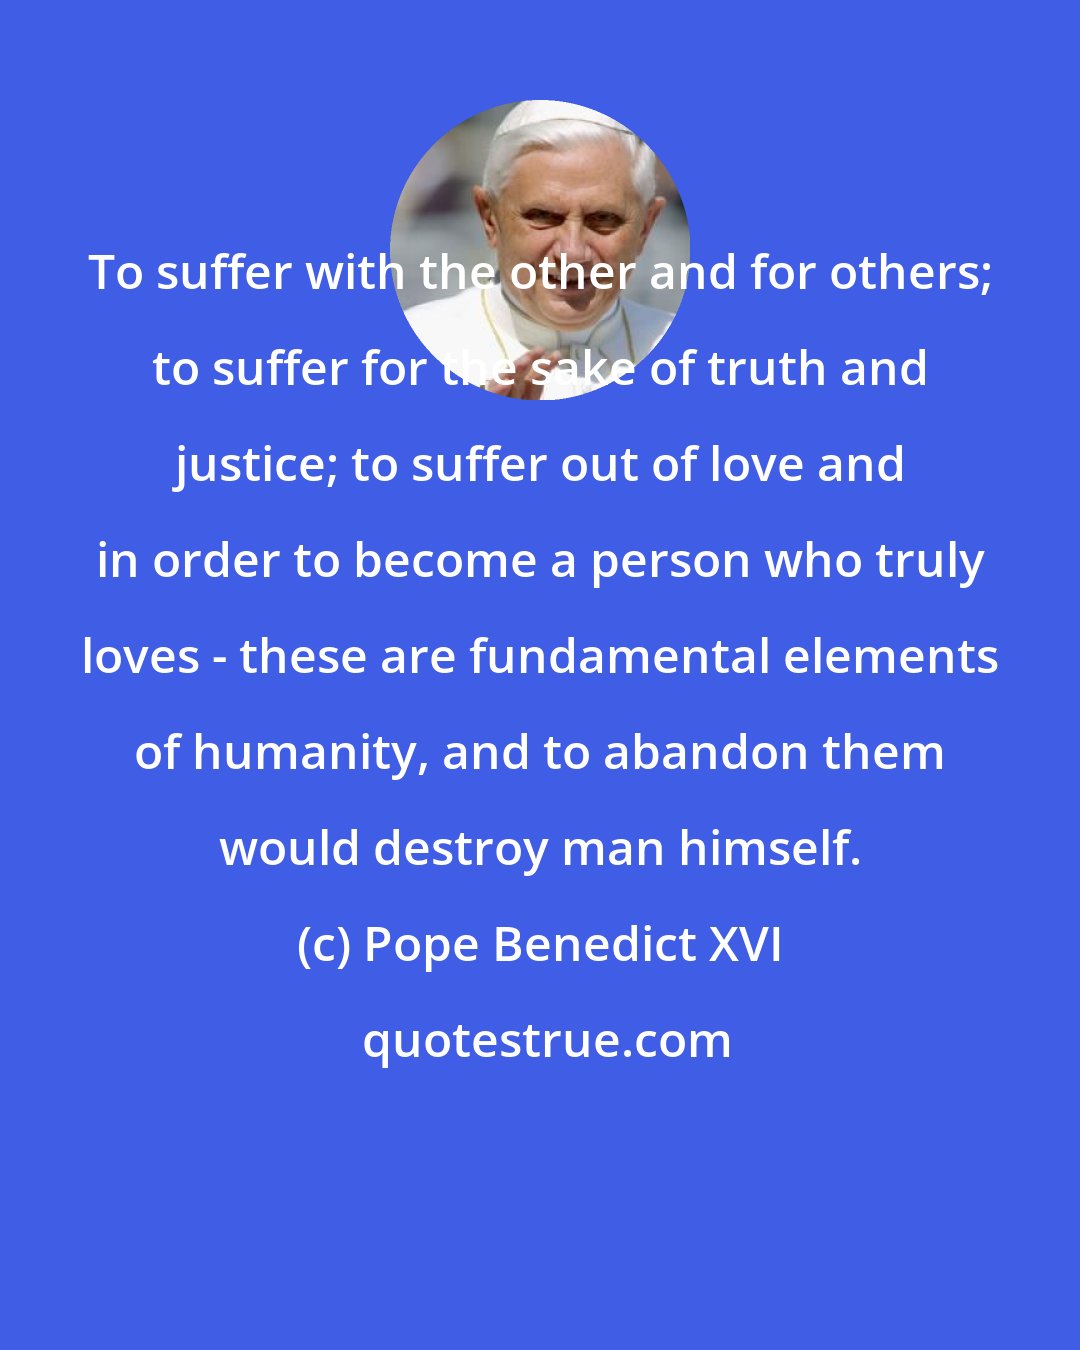 Pope Benedict XVI: To suffer with the other and for others; to suffer for the sake of truth and justice; to suffer out of love and in order to become a person who truly loves - these are fundamental elements of humanity, and to abandon them would destroy man himself.